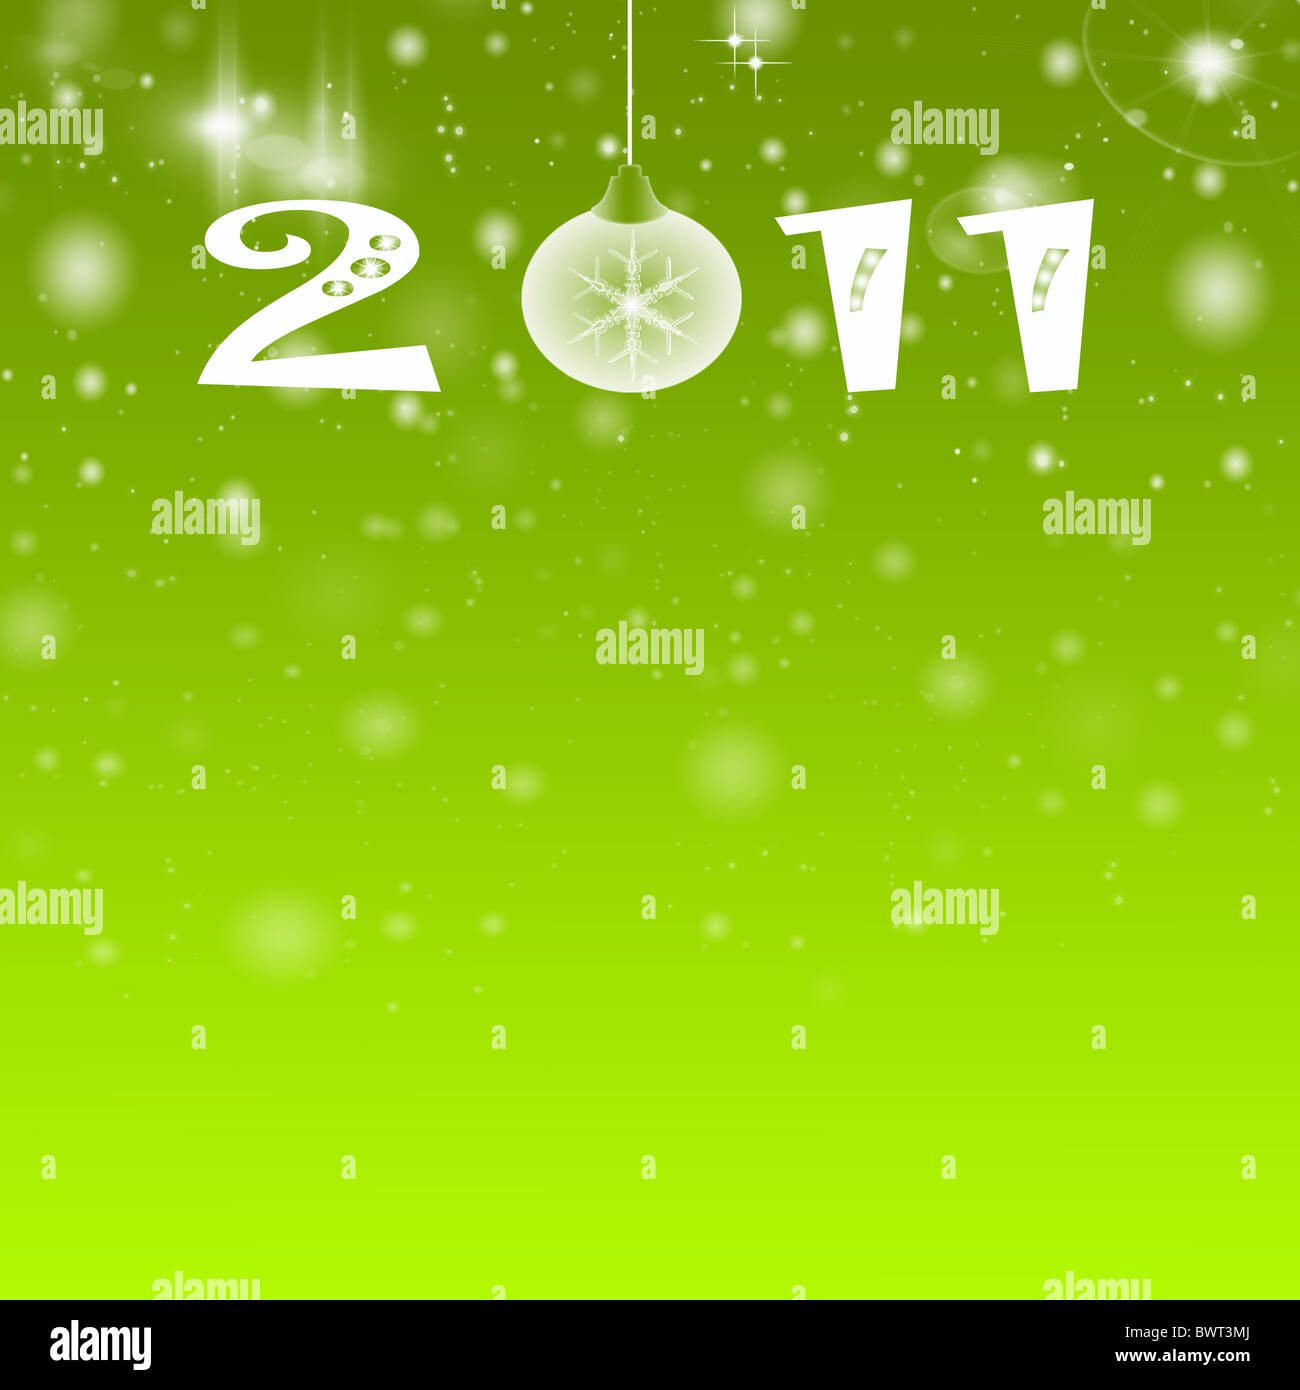 Abstract light background of 2011 Stock Photo